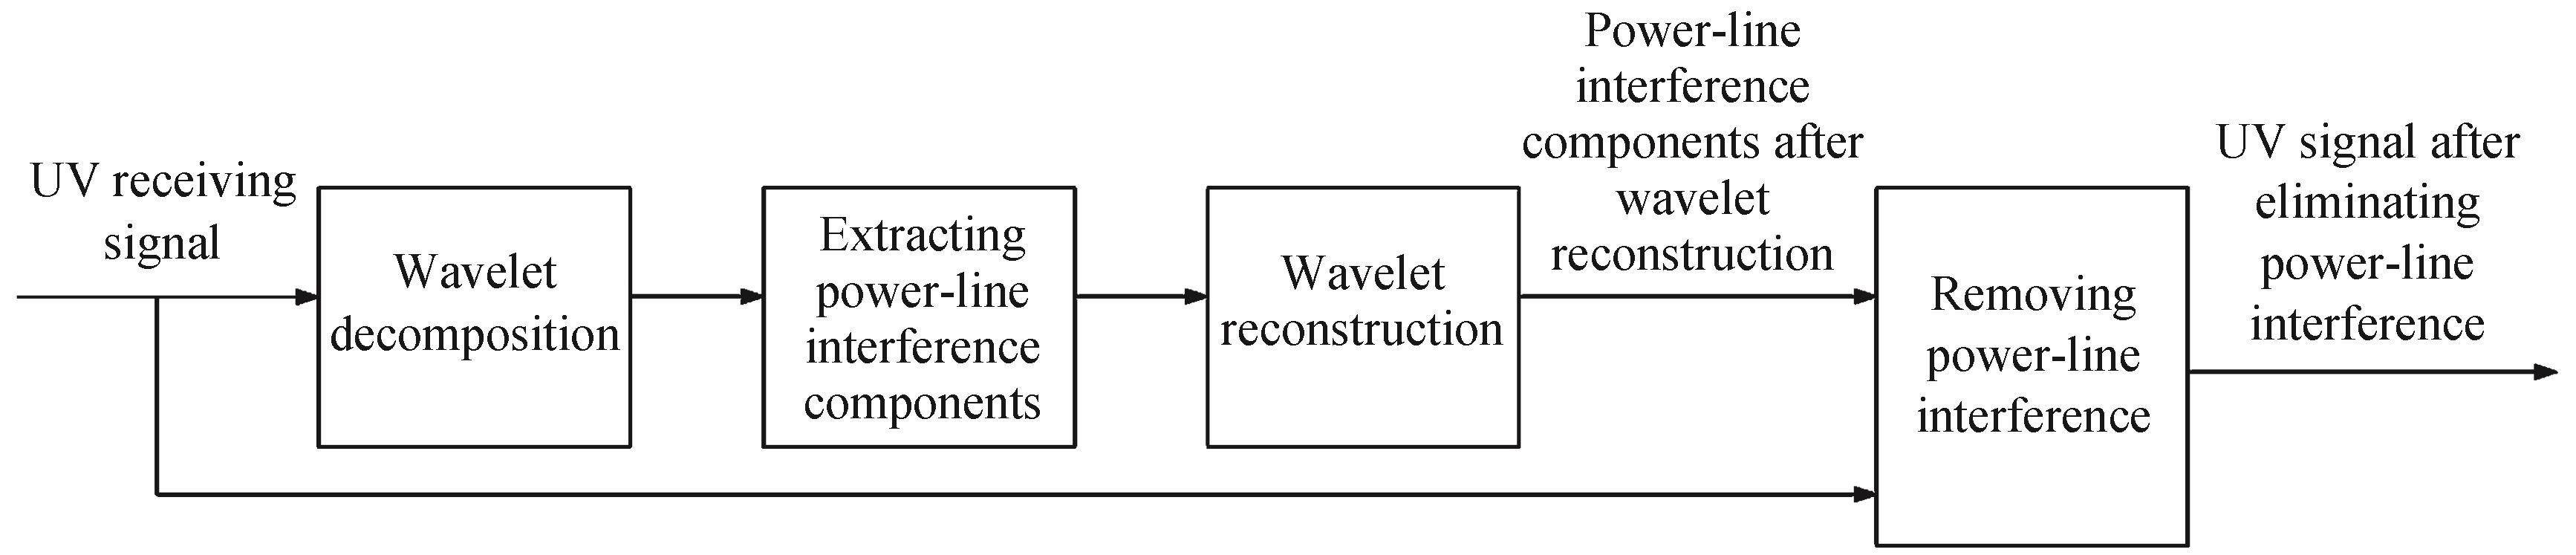 The process of removing power-line interference based on wavelet transform